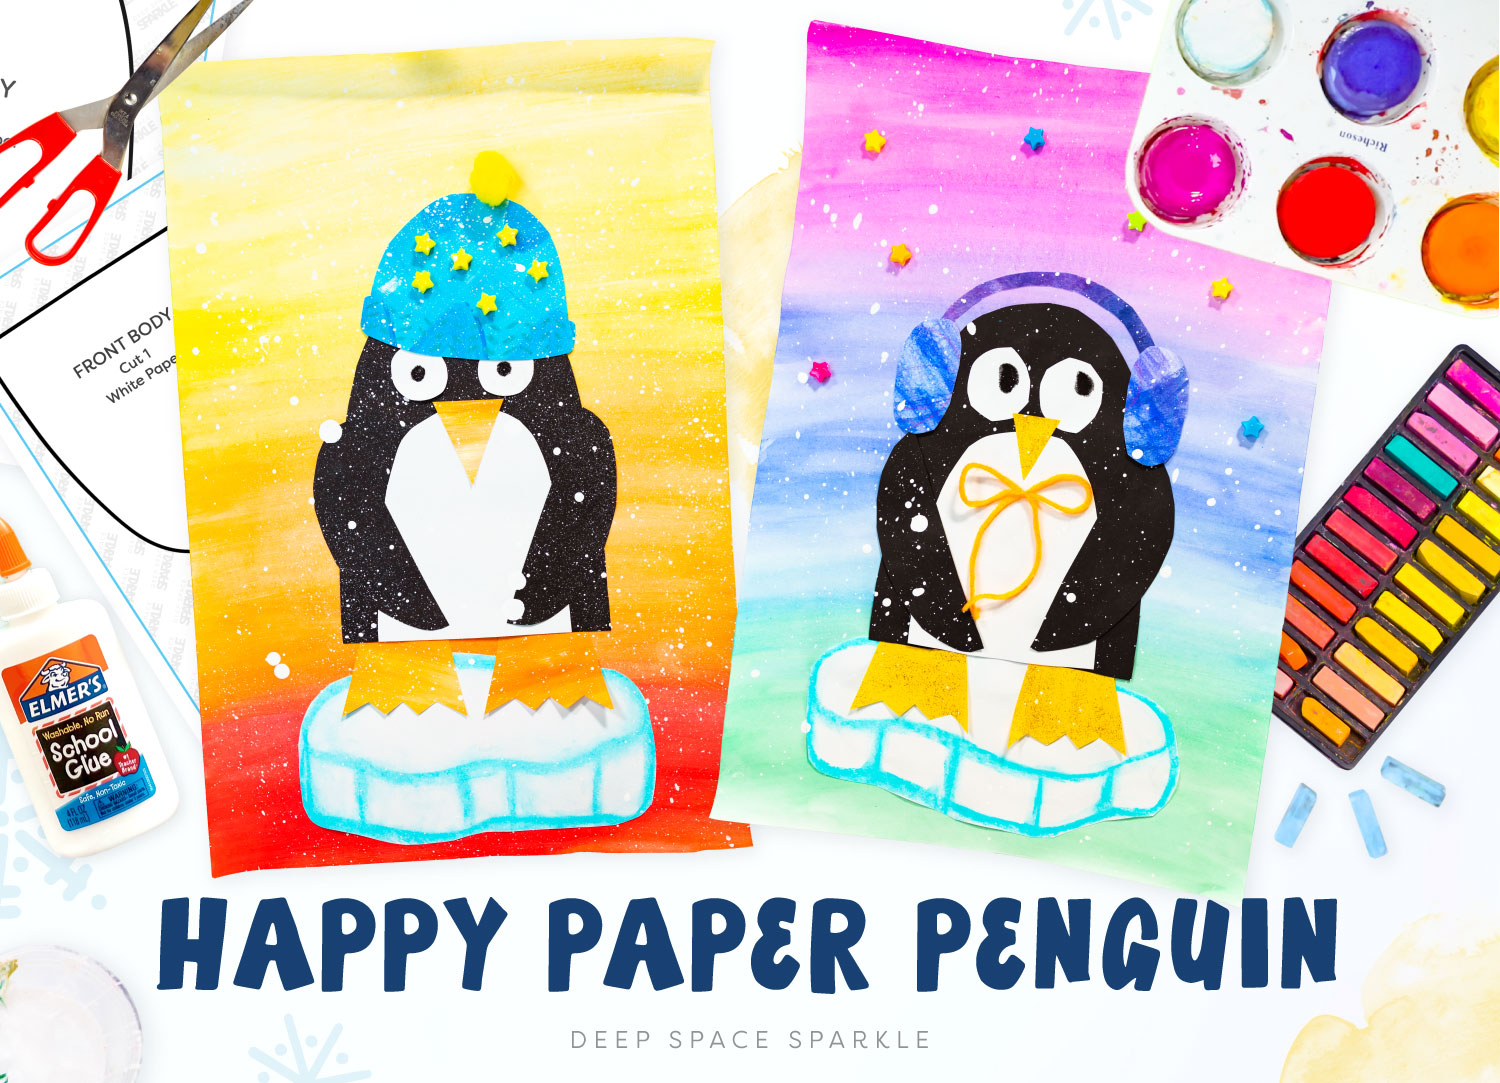 Cut It Out! Create These Cute Papercut Art Cards Just in Time for